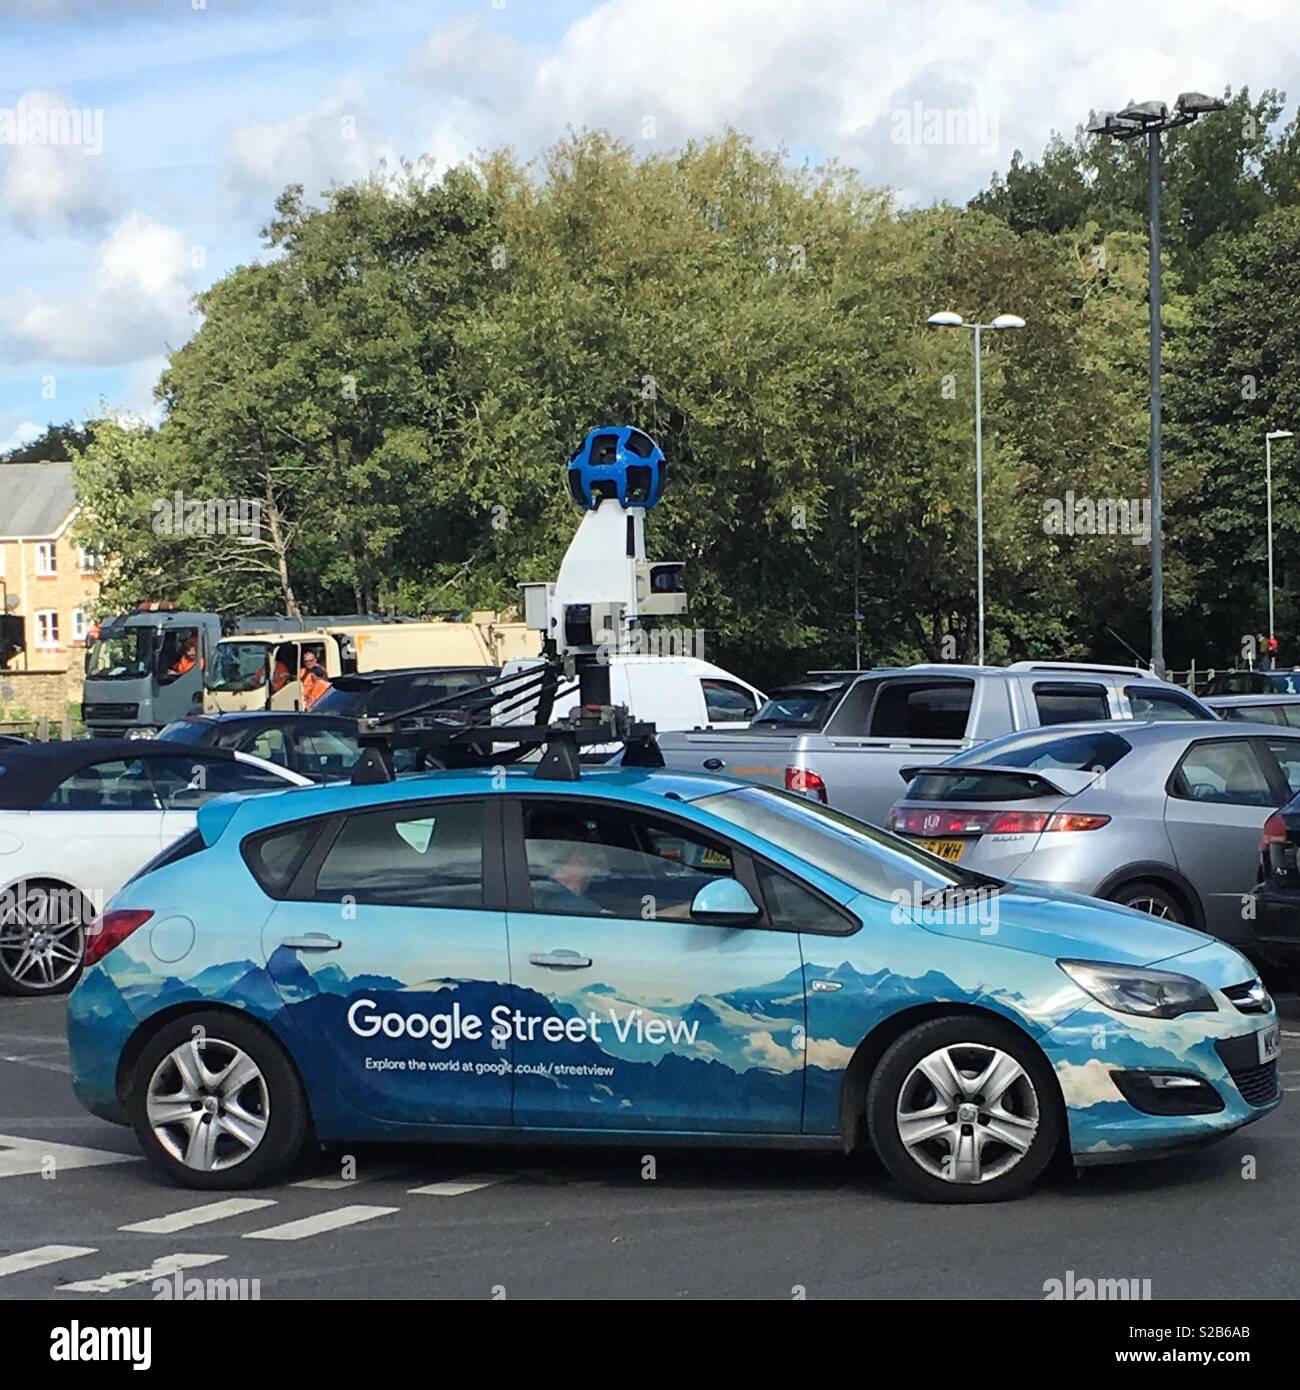 Google street car in the Market Yard Car park, Frome, Somerset, England. Stock Photo